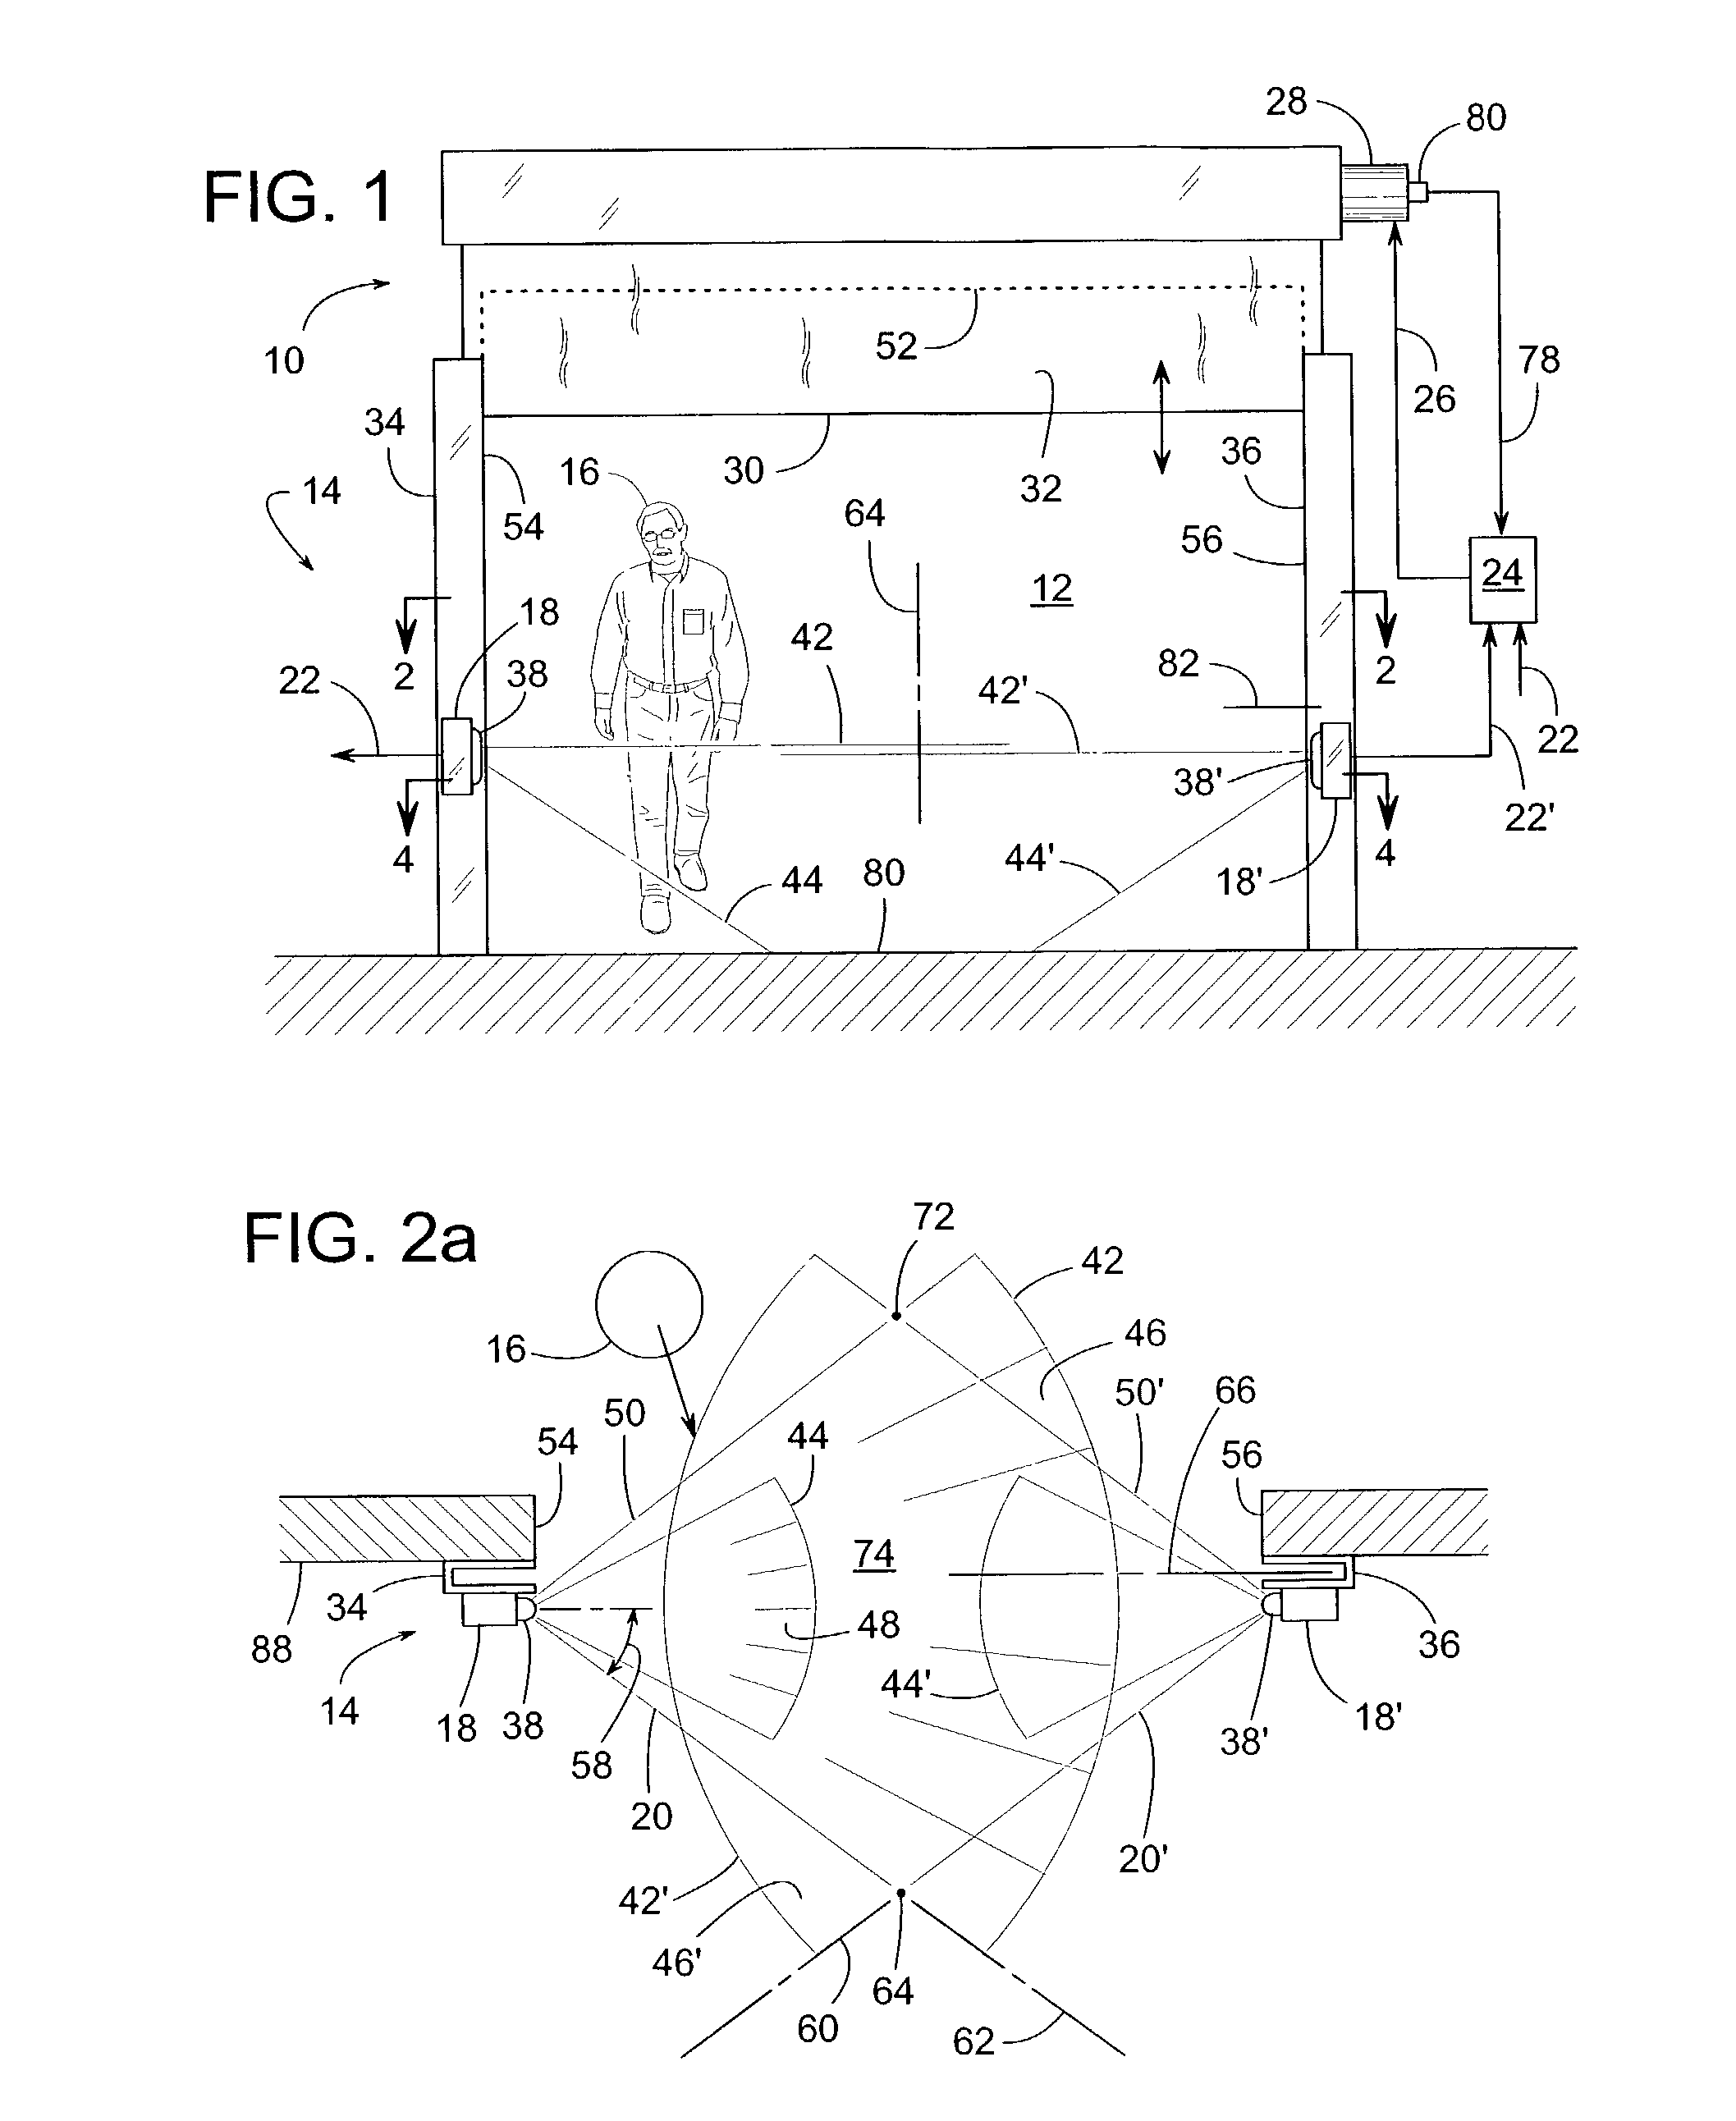 Passive detection system for detecting a body near a door